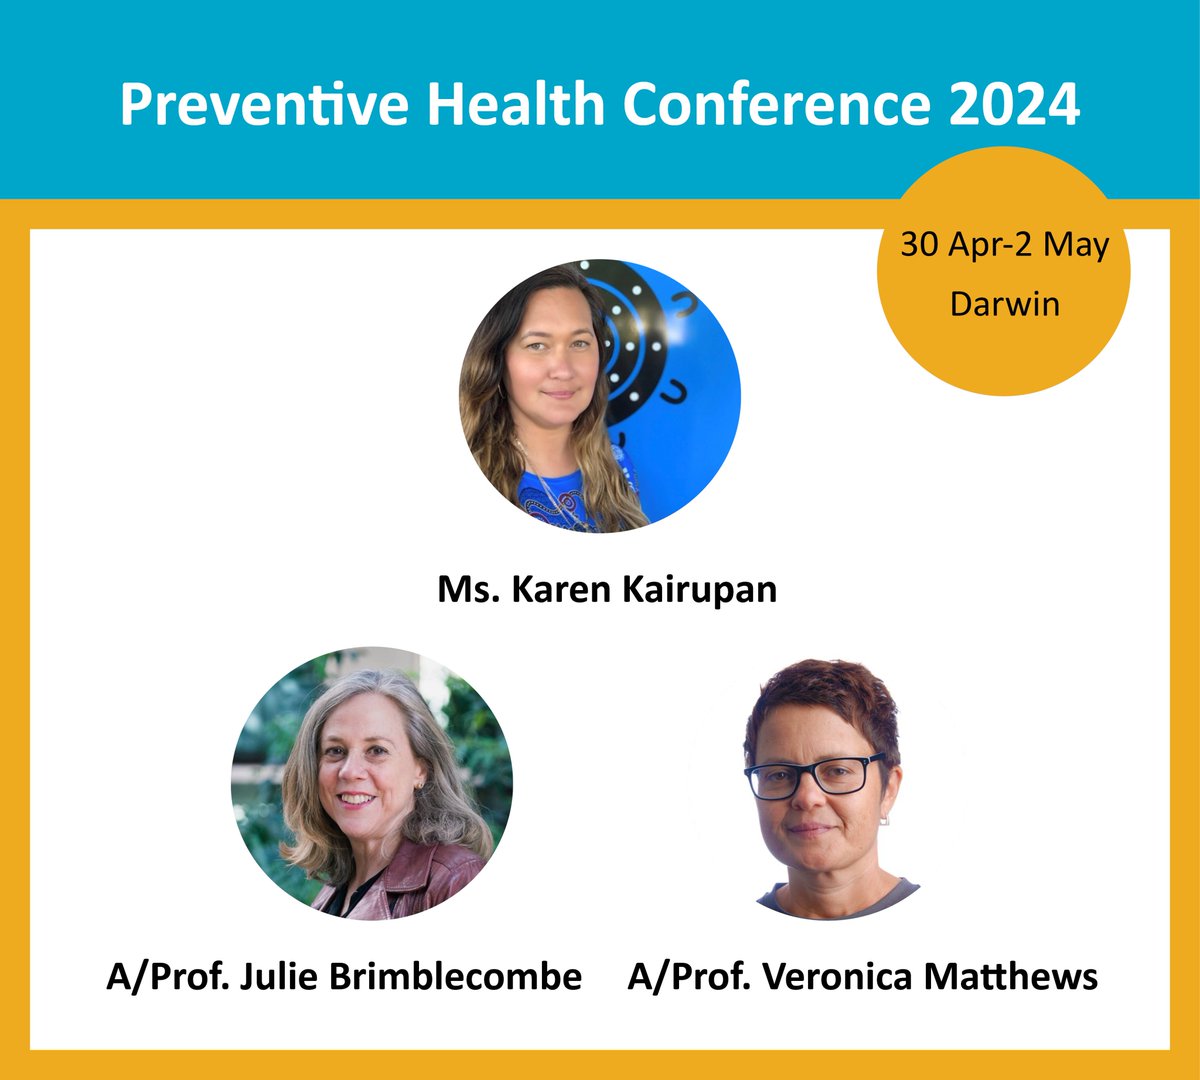 Register for #Prevention2024 to learn from these #PublicHealth & #FirstNationsHealth experts! We look forward to hearing from Karen Kairupan, Assoc Prof Julie Brimblecombe & Assoc Prof Veronica Matthews at Preventive Health in Darwin, 30 Apr - 2 May. @DrVMatthews @FoodForAllJulie